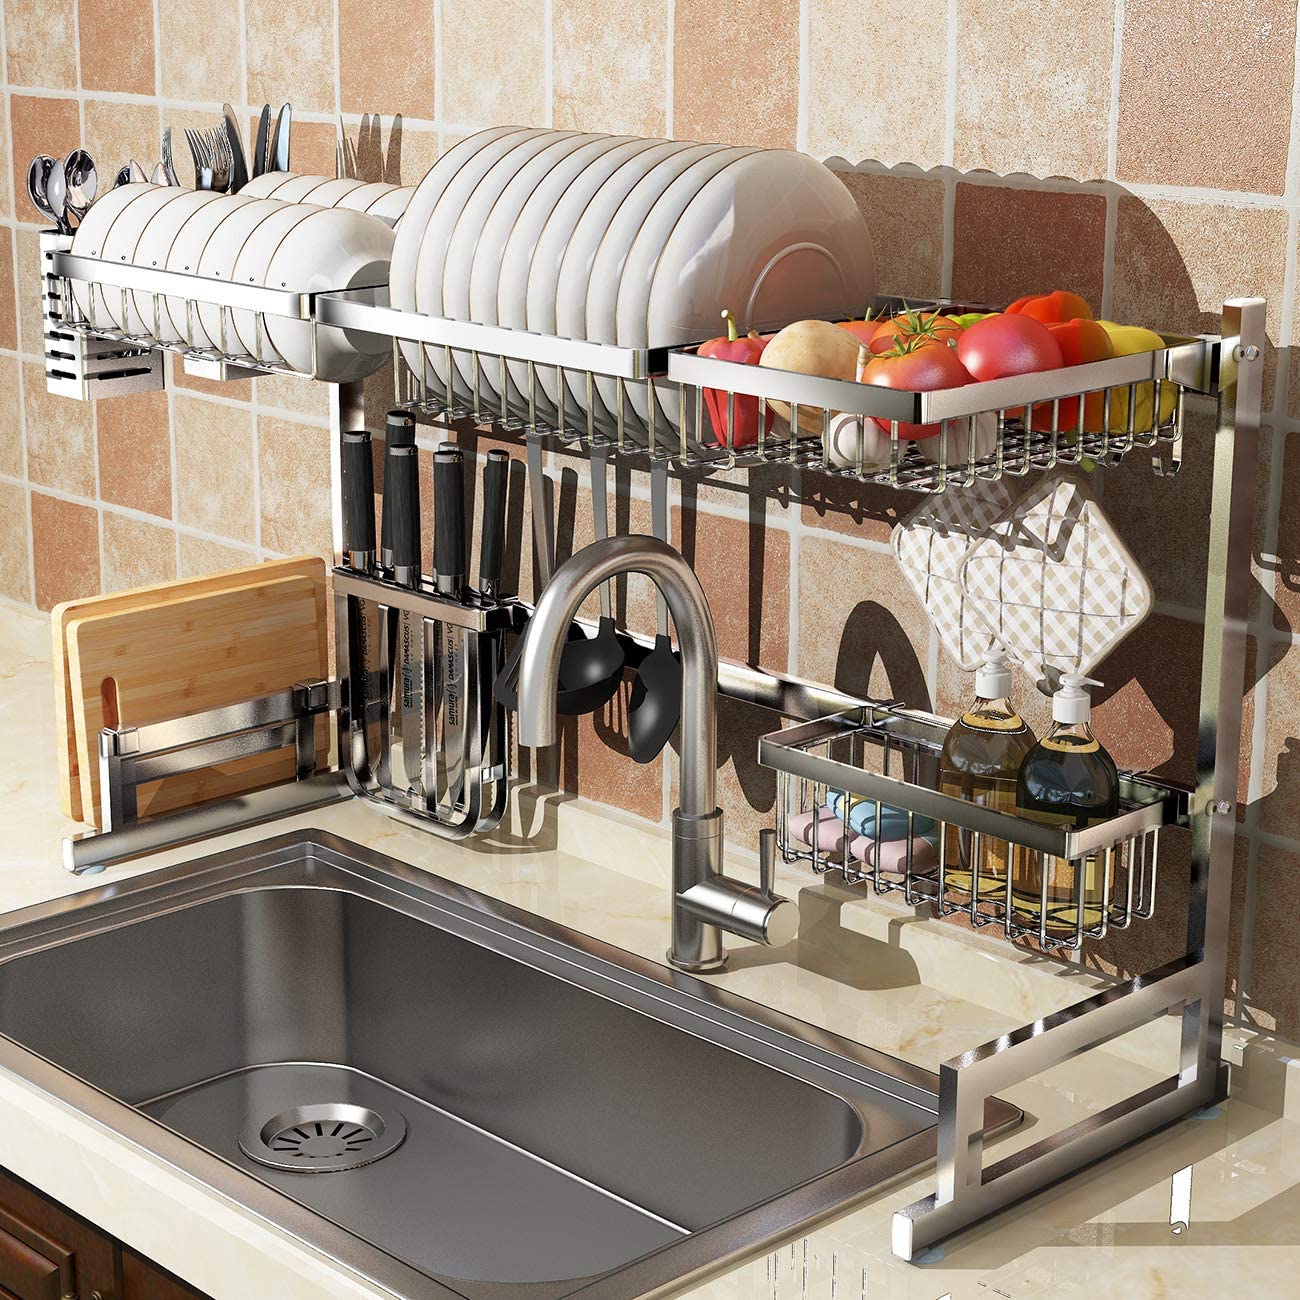 Over Sink Dish Drying Rack 2-Tier Stainless Steel Kitchen Shelf Cutlery Stainless Steel Over Sink Dish Rack